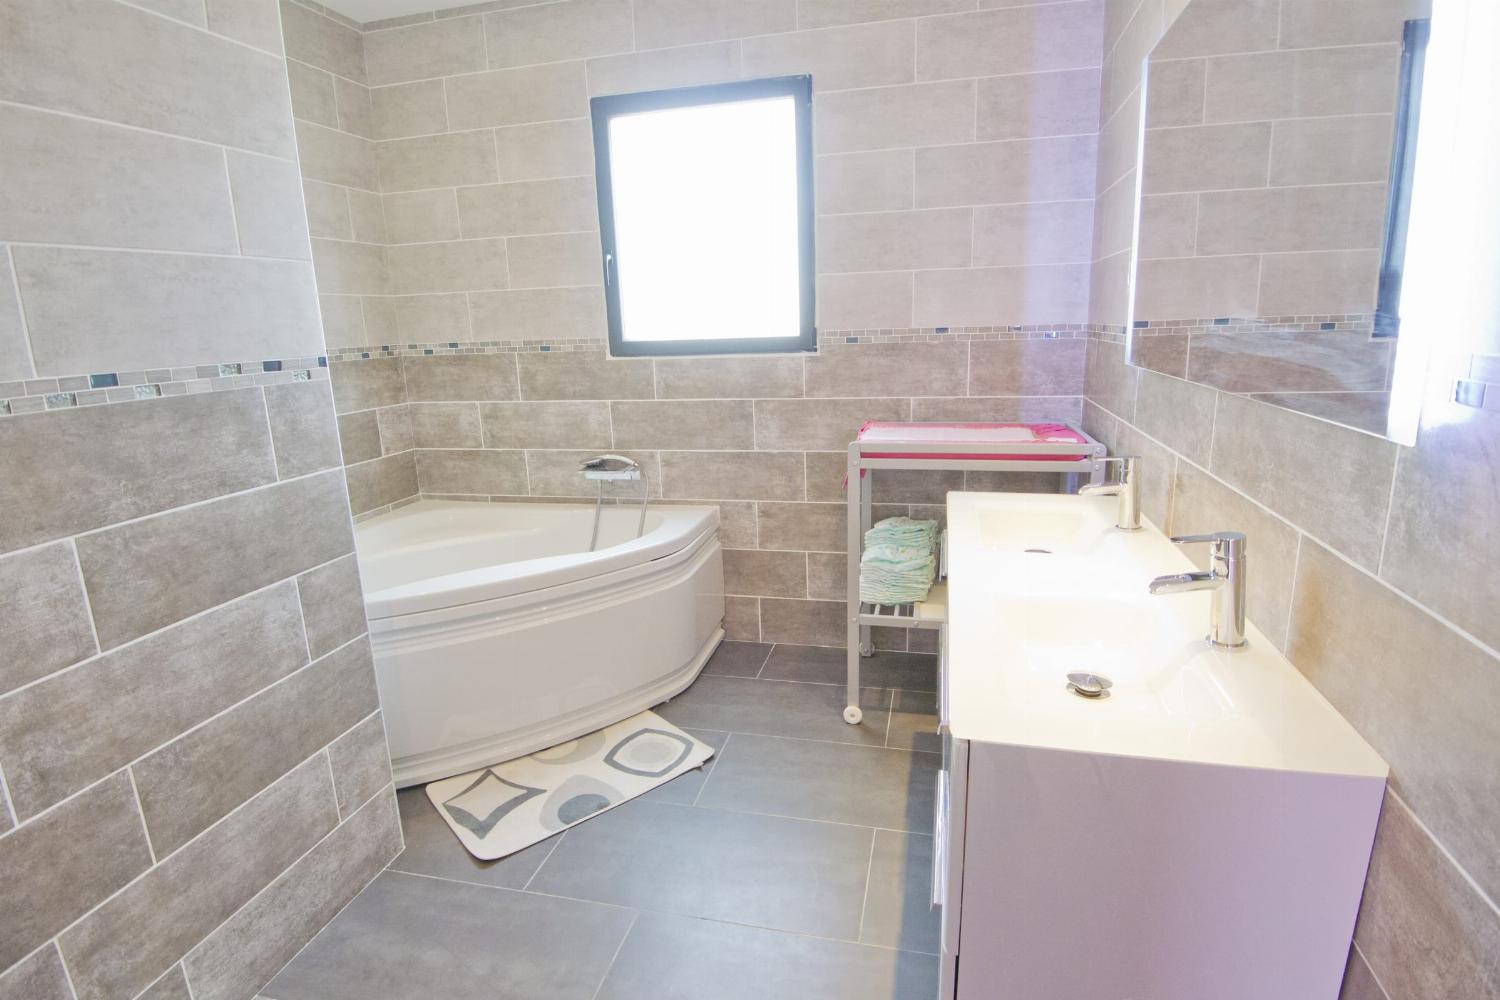 Bathroom | Rental accommodation in the South of France